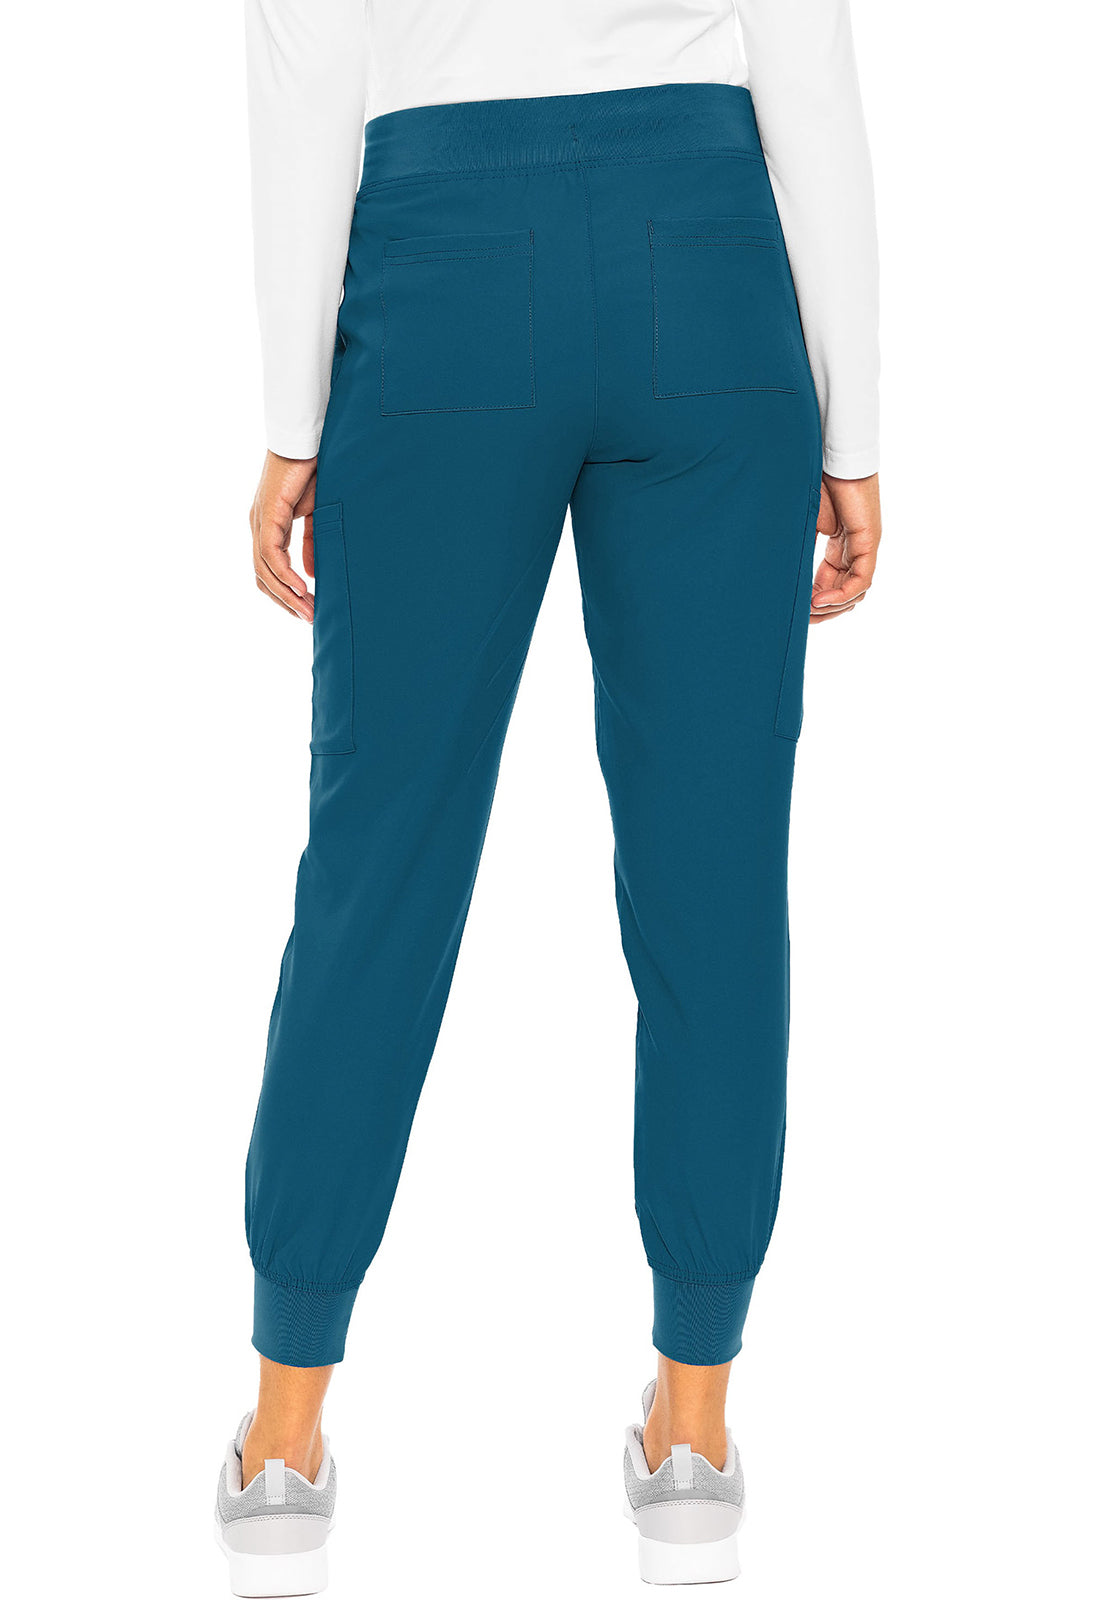 Med Couture 2711 Insight Women's Jogger Pant